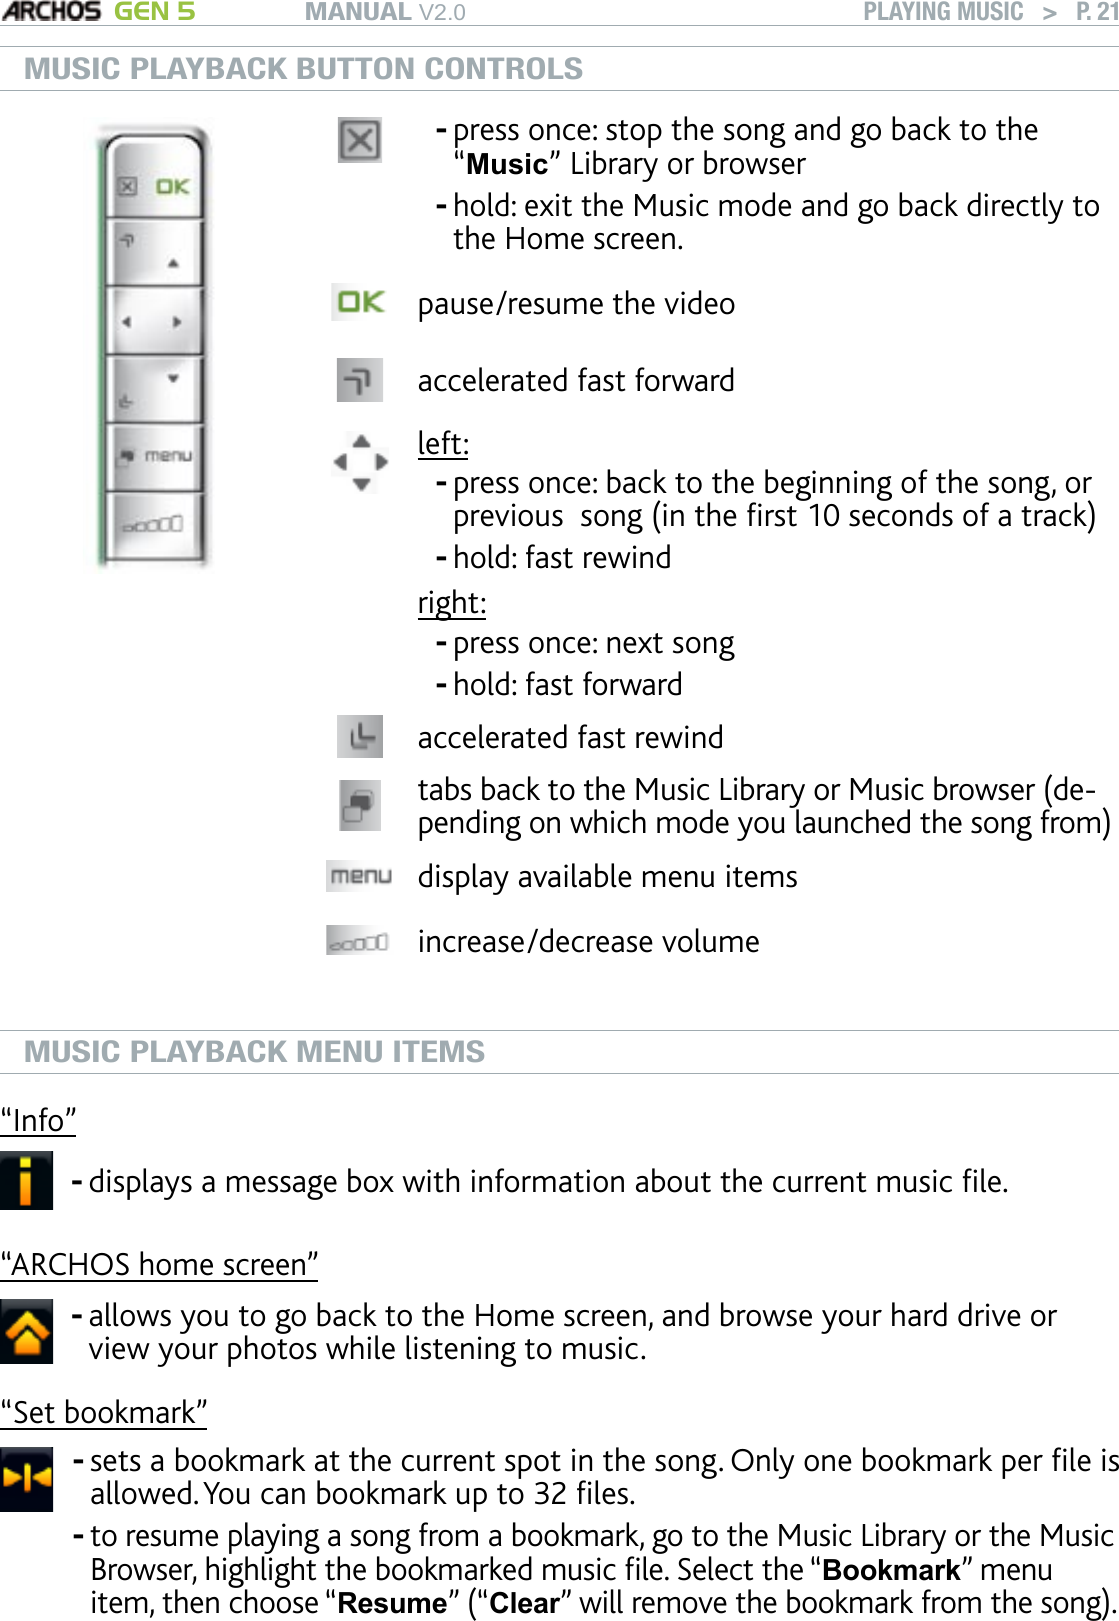 MANUAL V2.0 GEN 5 PLAYING MUSIC   &gt;   P. 21MUSIC PLAYBACK BUTTON CONTROLSpress once: stop the song and go back to the “Music” Library or browserhold: exit the Music mode and go back directly to the Home screen.--pause/resume the videoaccelerated fast forward left:press once: back to the beginning of the song, or previous  song (in the rst 10 seconds of a track)hold: fast rewindright:press once: next songhold: fast forward----accelerated fast rewindtabs back to the Music Library or Music browser (de-pending on which mode you launched the song from)display available menu itemsincrease/decrease volumeMUSIC PLAYBACK MENU ITEMS“Info”displays a message box with information about the current music le.-“ARCHOS home screen”allows you to go back to the Home screen, and browse your hard drive or view your photos while listening to music.-“Set bookmark”sets a bookmark at the current spot in the song. Only one bookmark per le is allowed. You can bookmark up to 32 les. to resume playing a song from a bookmark, go to the Music Library or the Music Browser, highlight the bookmarked music le. Select the “Bookmark” menu item, then choose “Resume” (“Clear” will remove the bookmark from the song).--